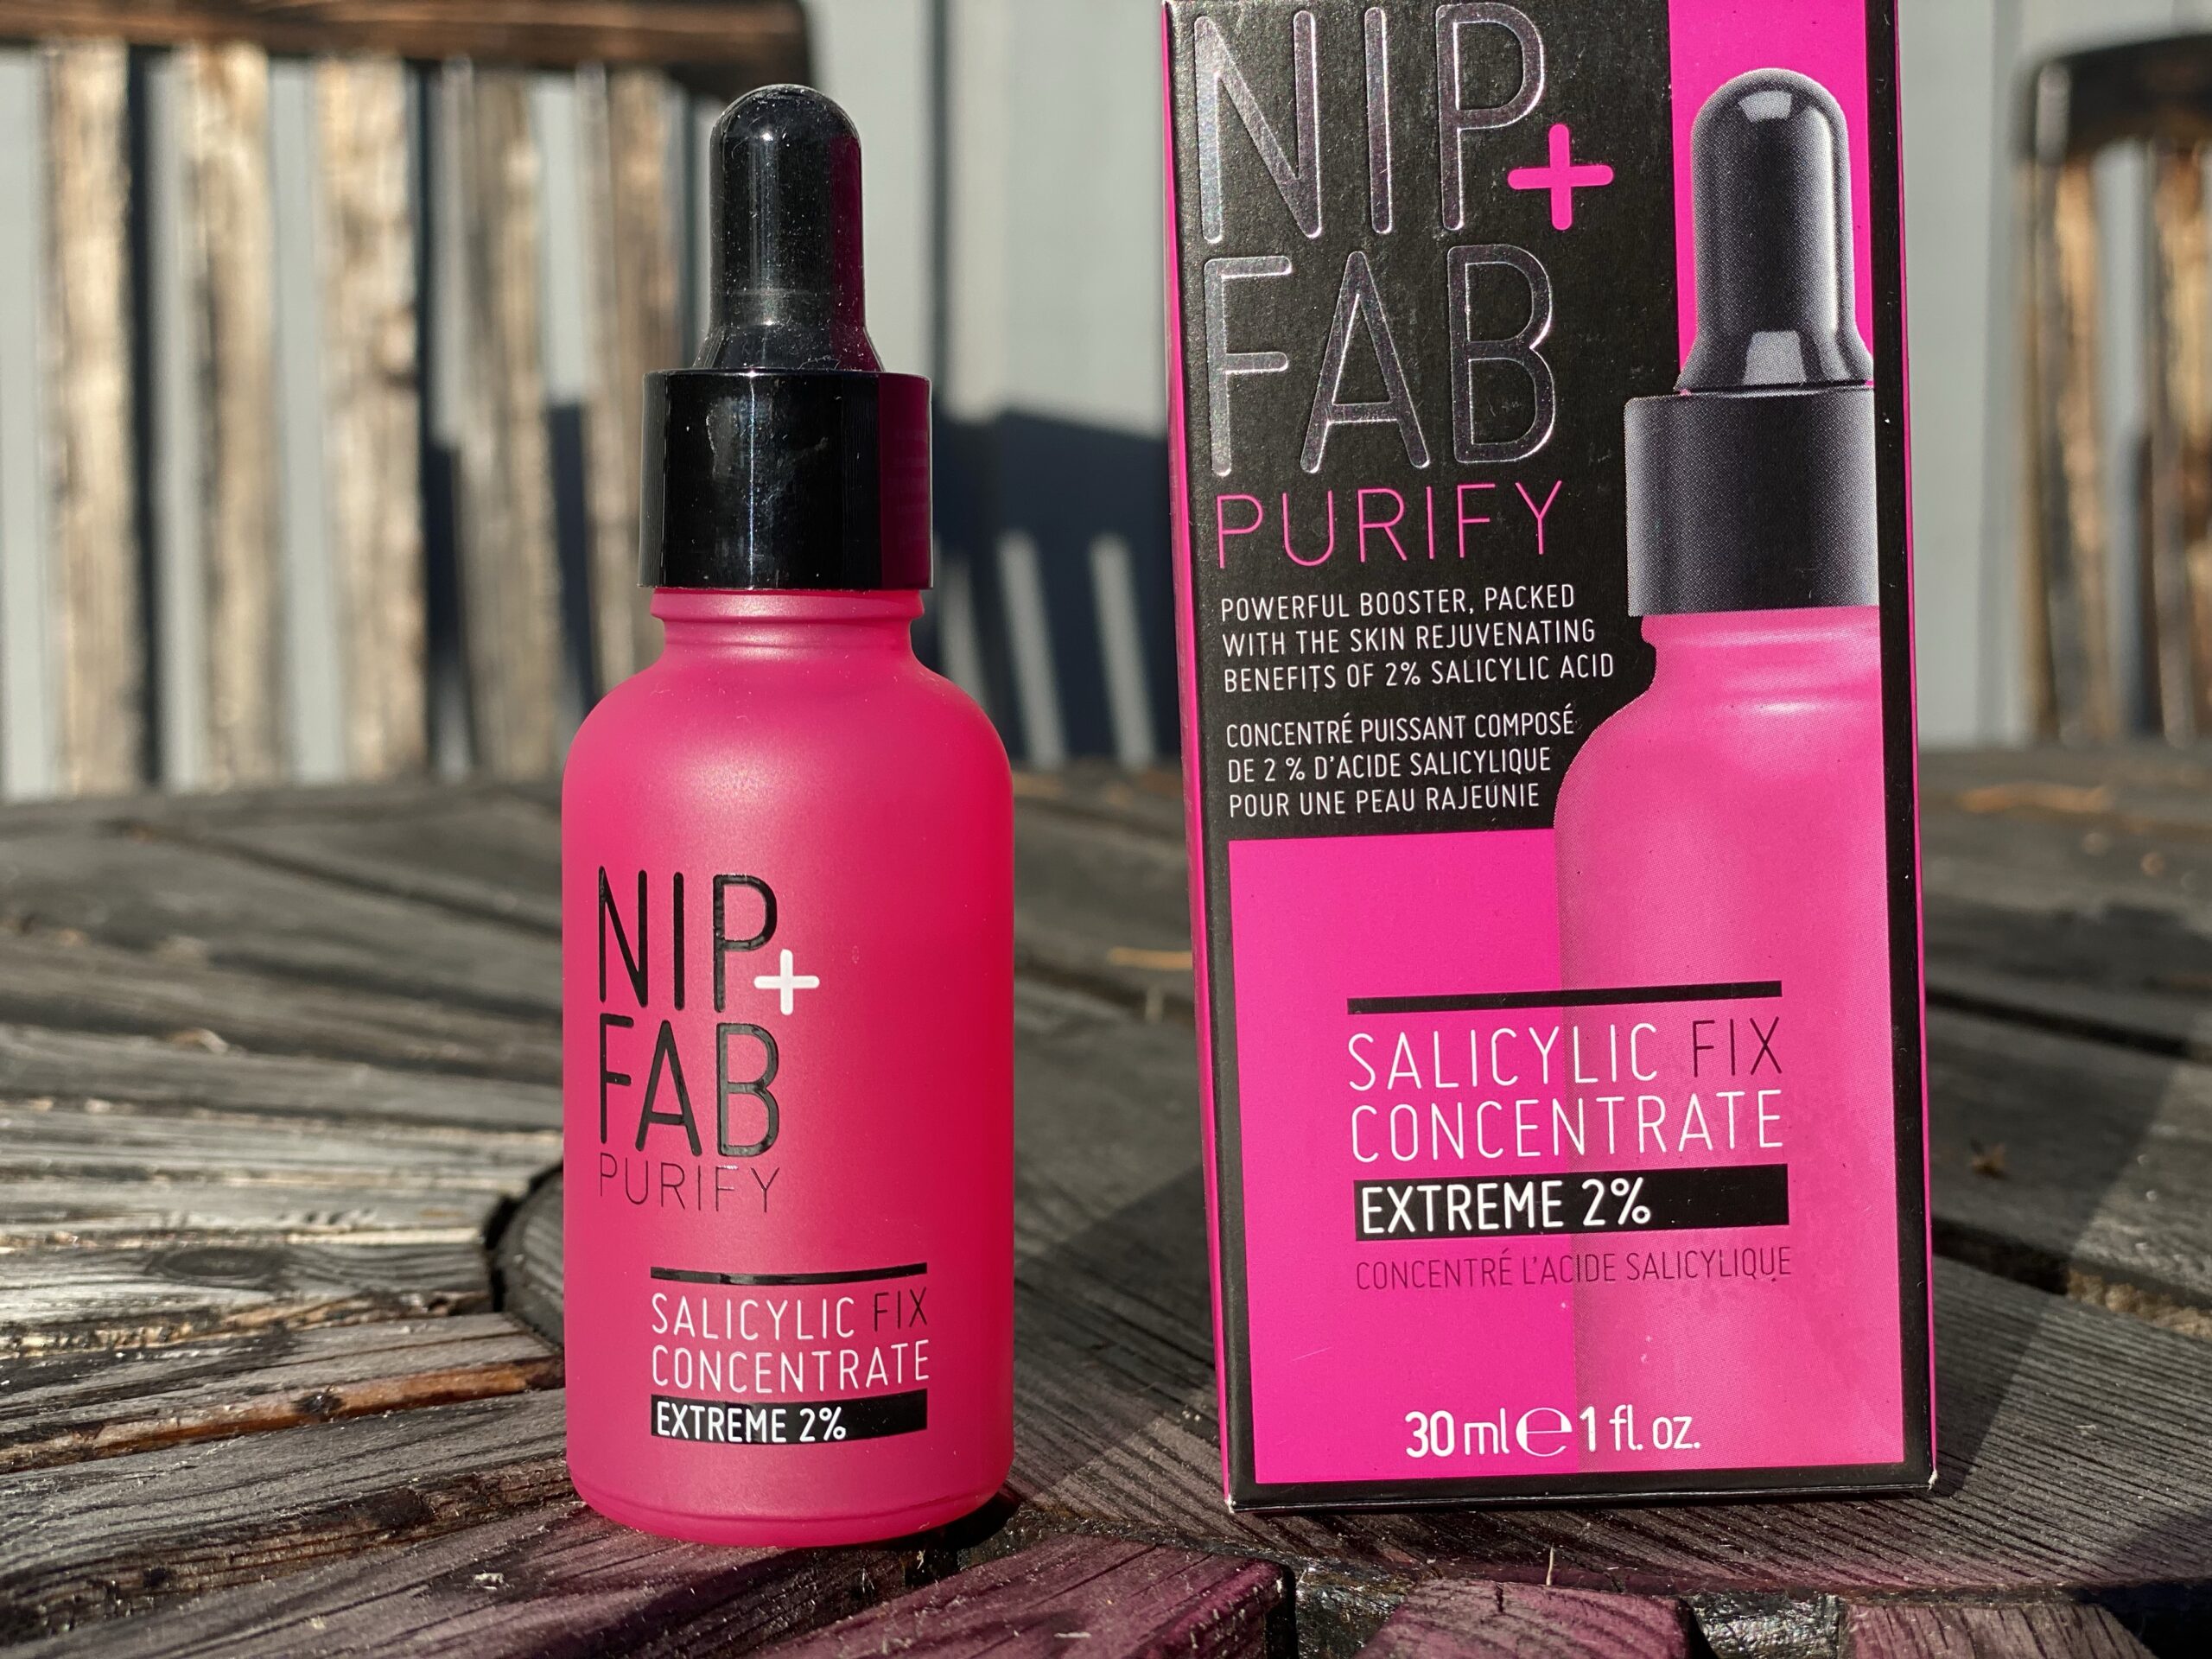 Nip+Fab salicylic fix concentrate extreme 2%